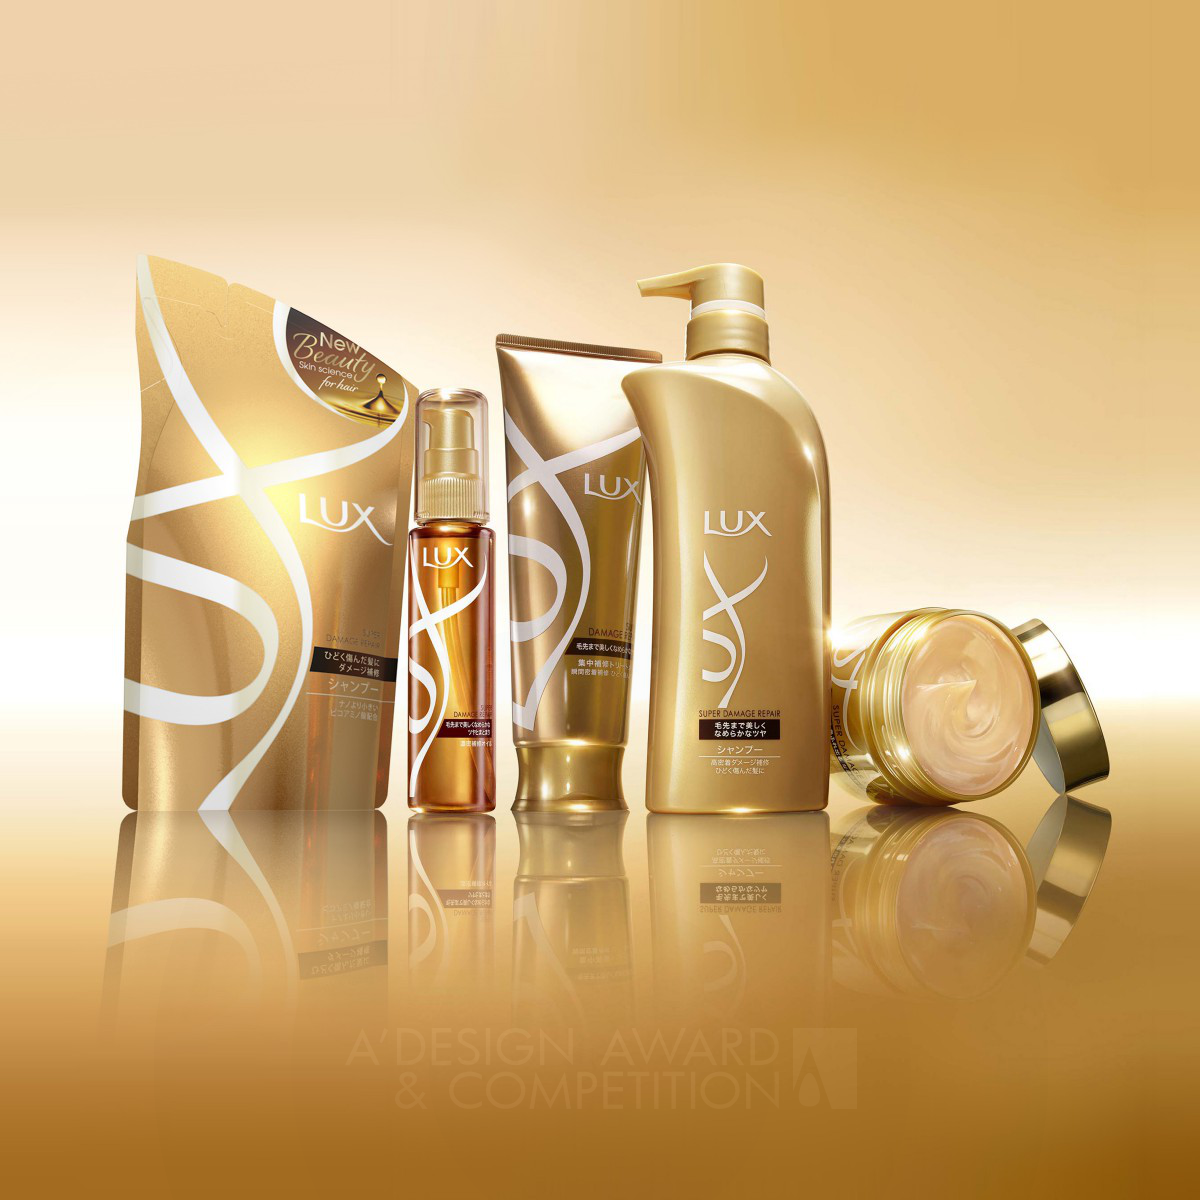 Lux re-launch in Japan Haircare range by JDO Brand & Design